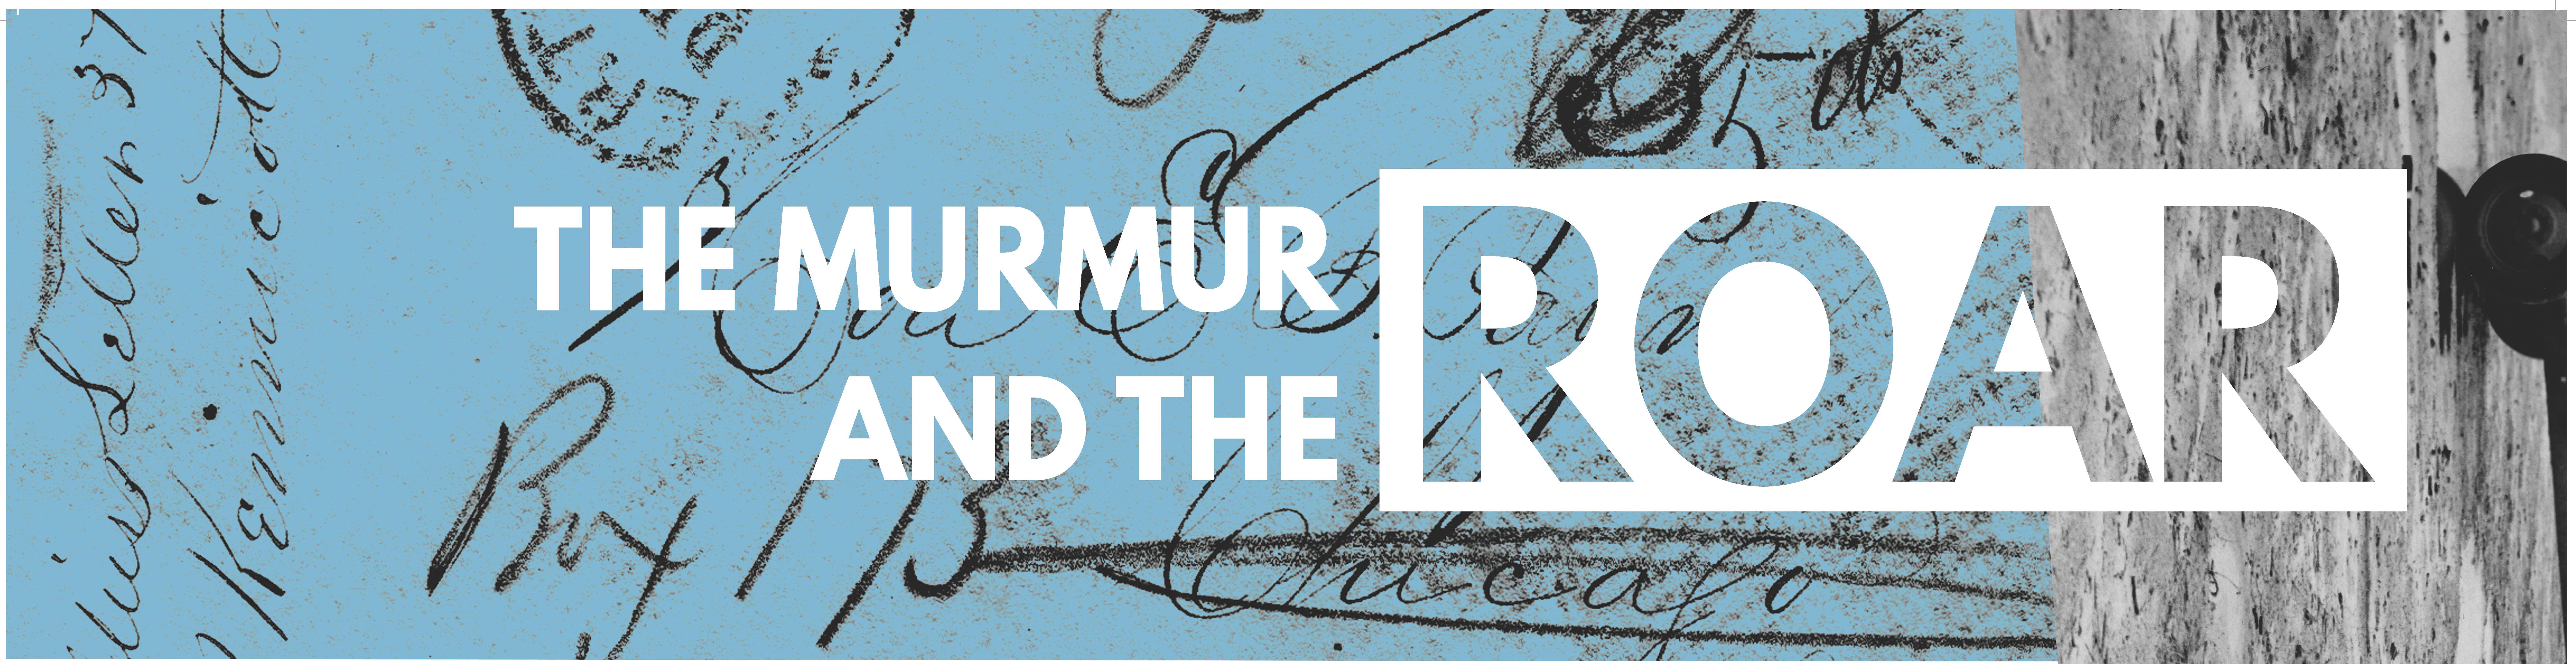 The Murmur and the Roar - title image